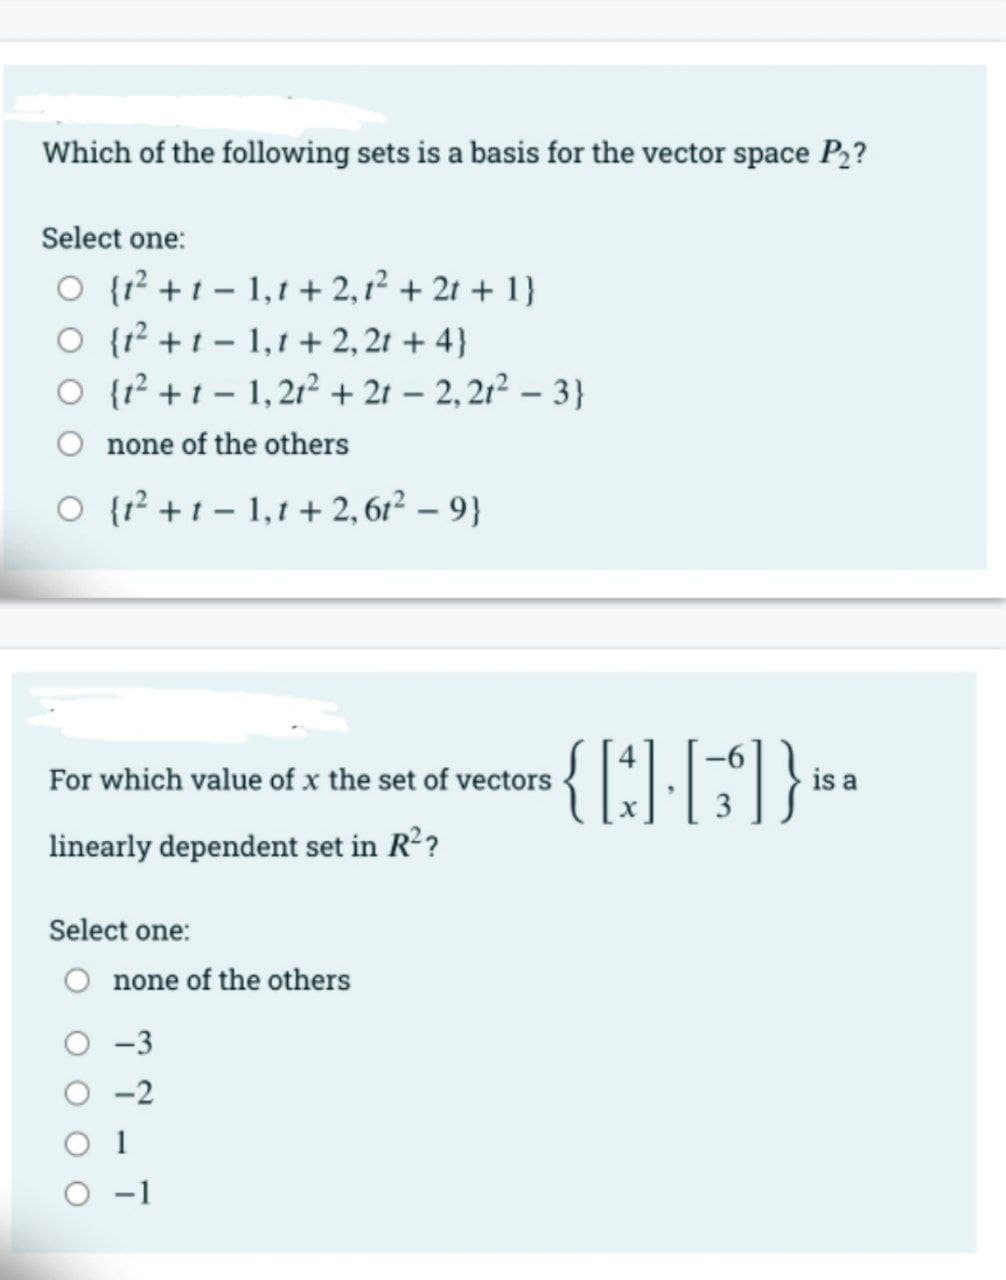 Which of the following sets is a basis for the vector space P2?
Select one:
O {r? + t – 1,1 + 2,1² + 21 + 1}
O {1² + t - 1,1 + 2, 21 + 4}
O {r² + t – 1,21² + 2t – 2,21² – 3}
O none of the others
O {r² +t – 1,1 + 2, 6r² – 9}
For which value of x the set of vectors
is a
linearly dependent set in R??
Select one:
O none of the others
O -3
O -2
O 1
